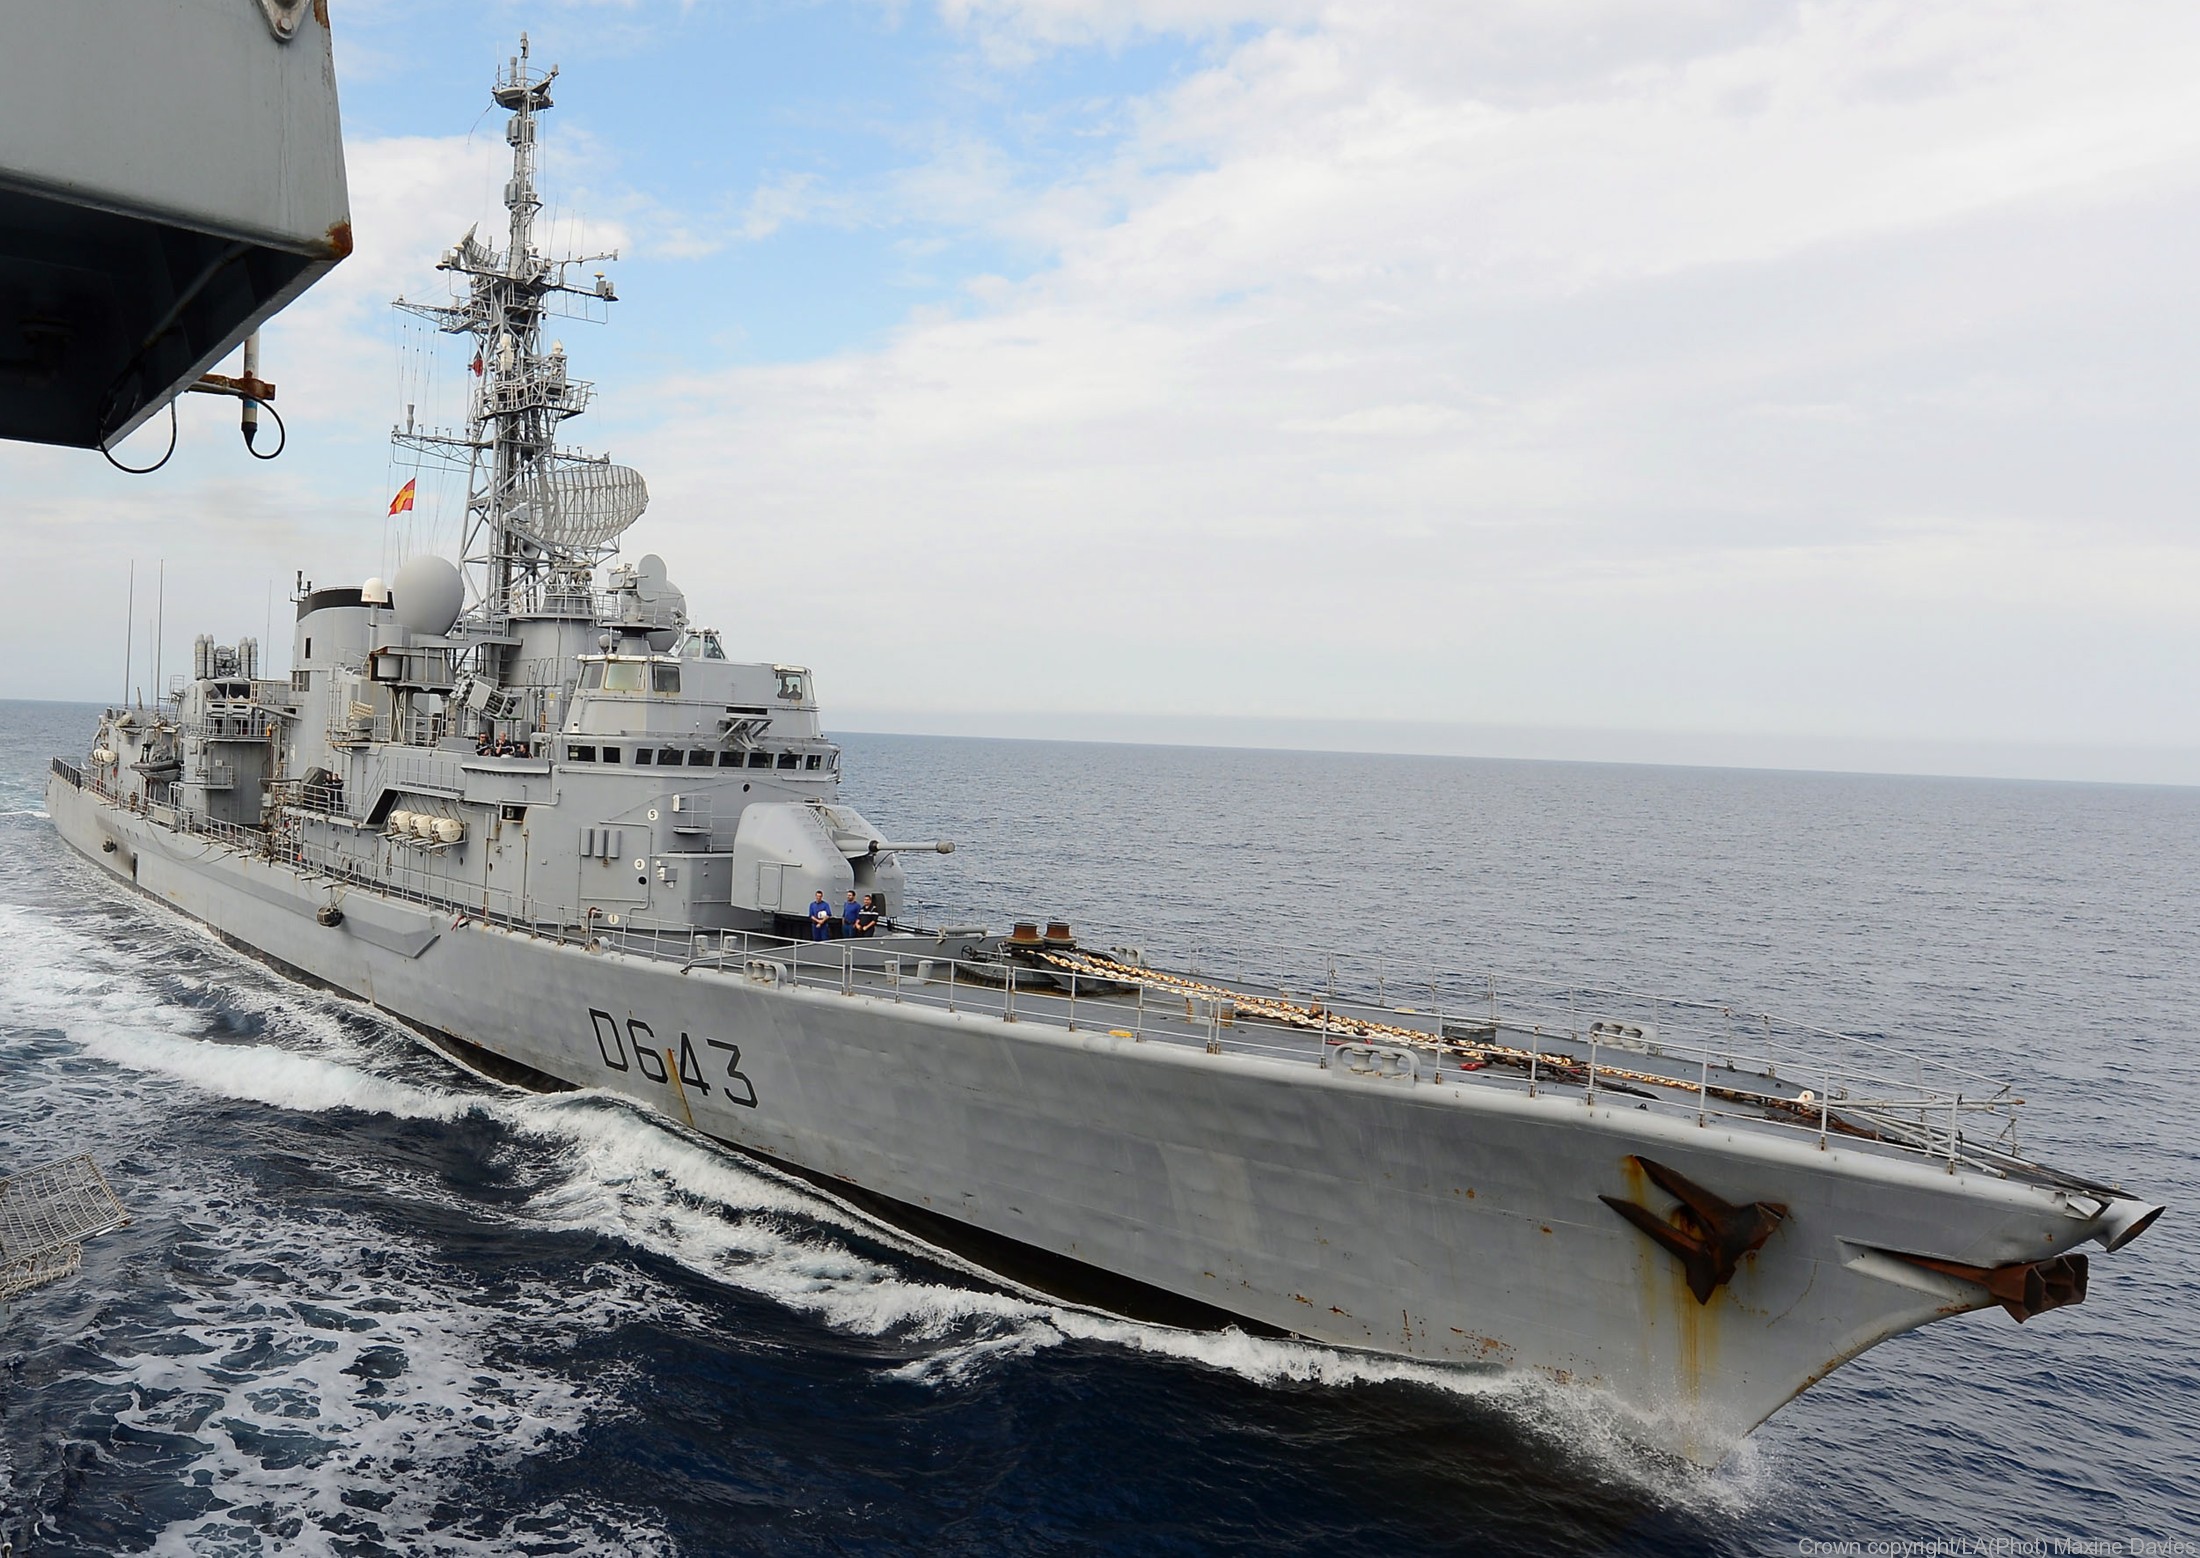 d-643 fs jean de vienne leygues class f70as asw frigate destroyer french navy marine nationale 11